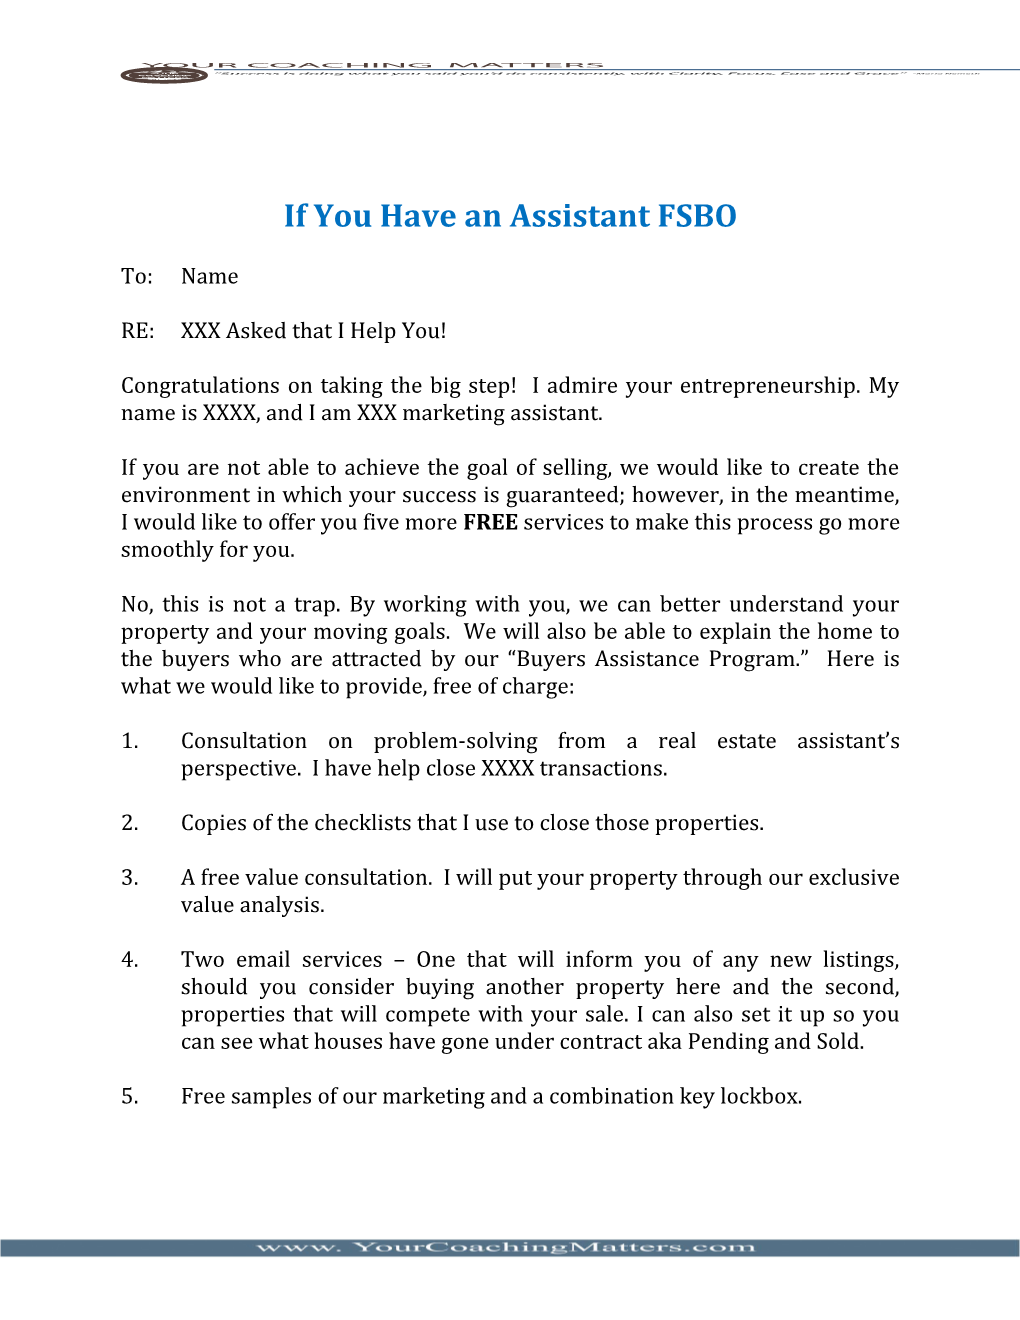 If You Have an Assistant FSBO